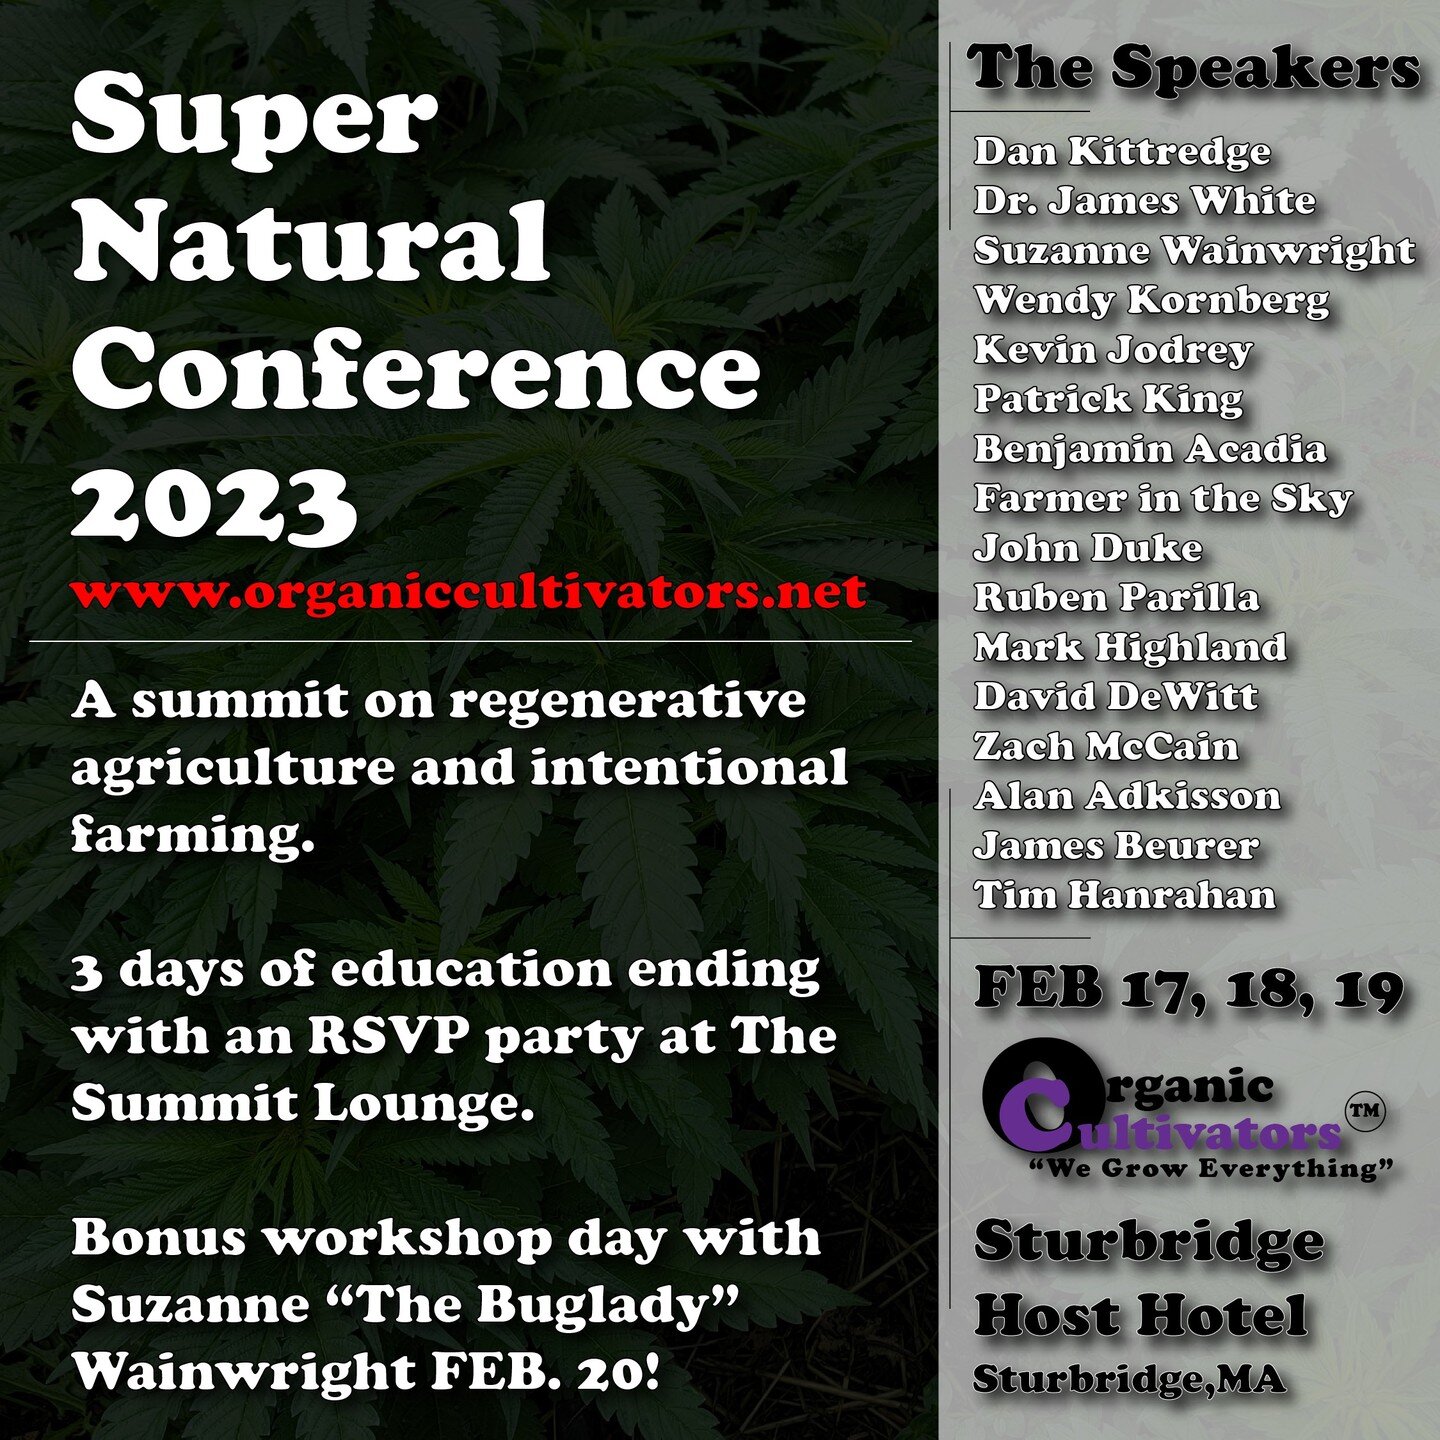 Join us in 2023 for a gathering of soil nerds and legacy for an exchange of ideas. 3 days of regenerative agriculture education featuring some of the best minds out here doing the work.

@sunnabis @bugladysuzanne @kevinjodrey @thesoilking @benjaminac